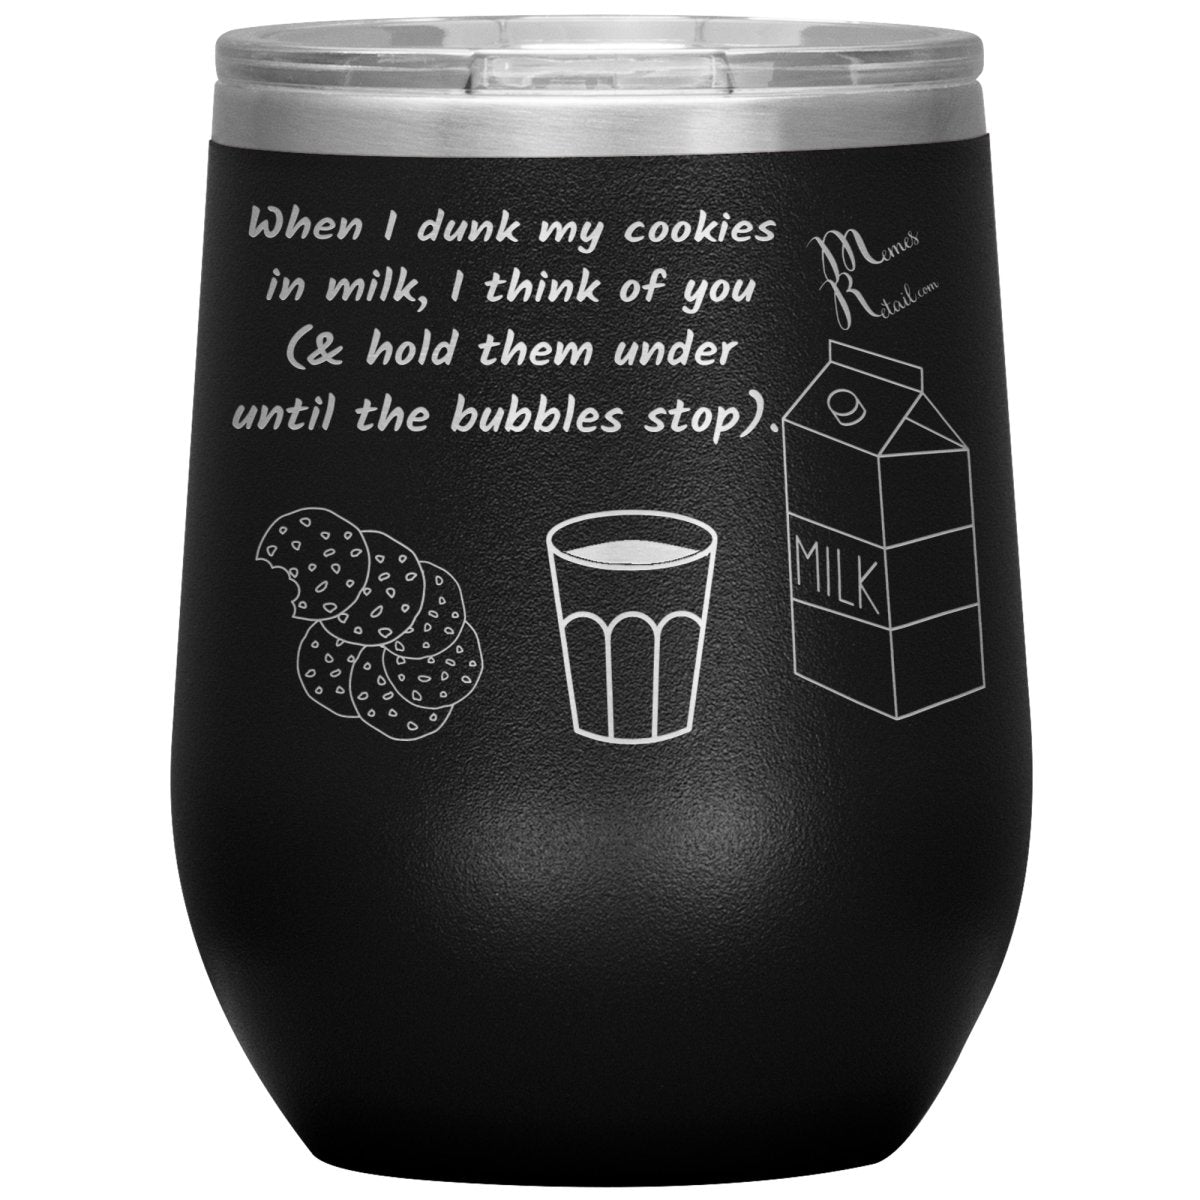 When I dunk My Cookies in Milk, I think of You - Tumblers, 12oz Wine Insulated Tumbler / Black - MemesRetail.com